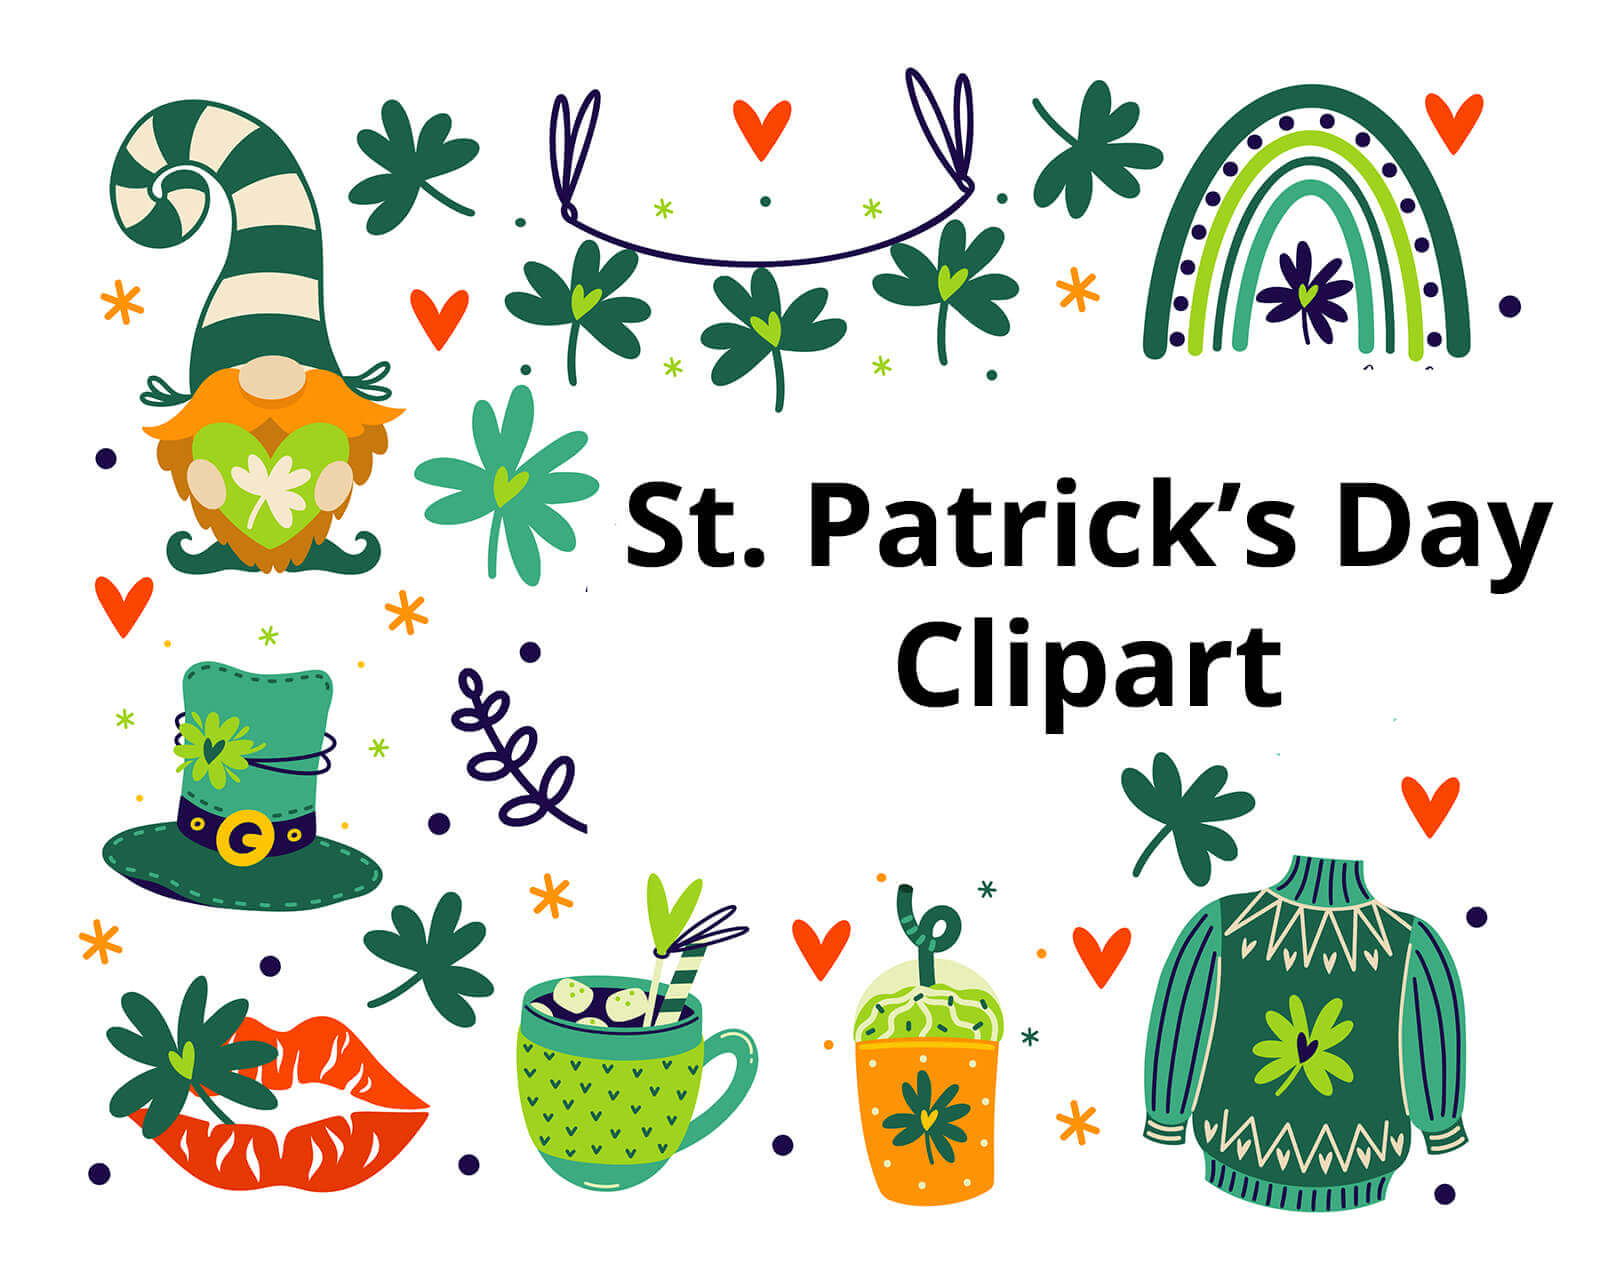 Why are Leprechauns associated with St Patrick's Day? Teaching Wiki